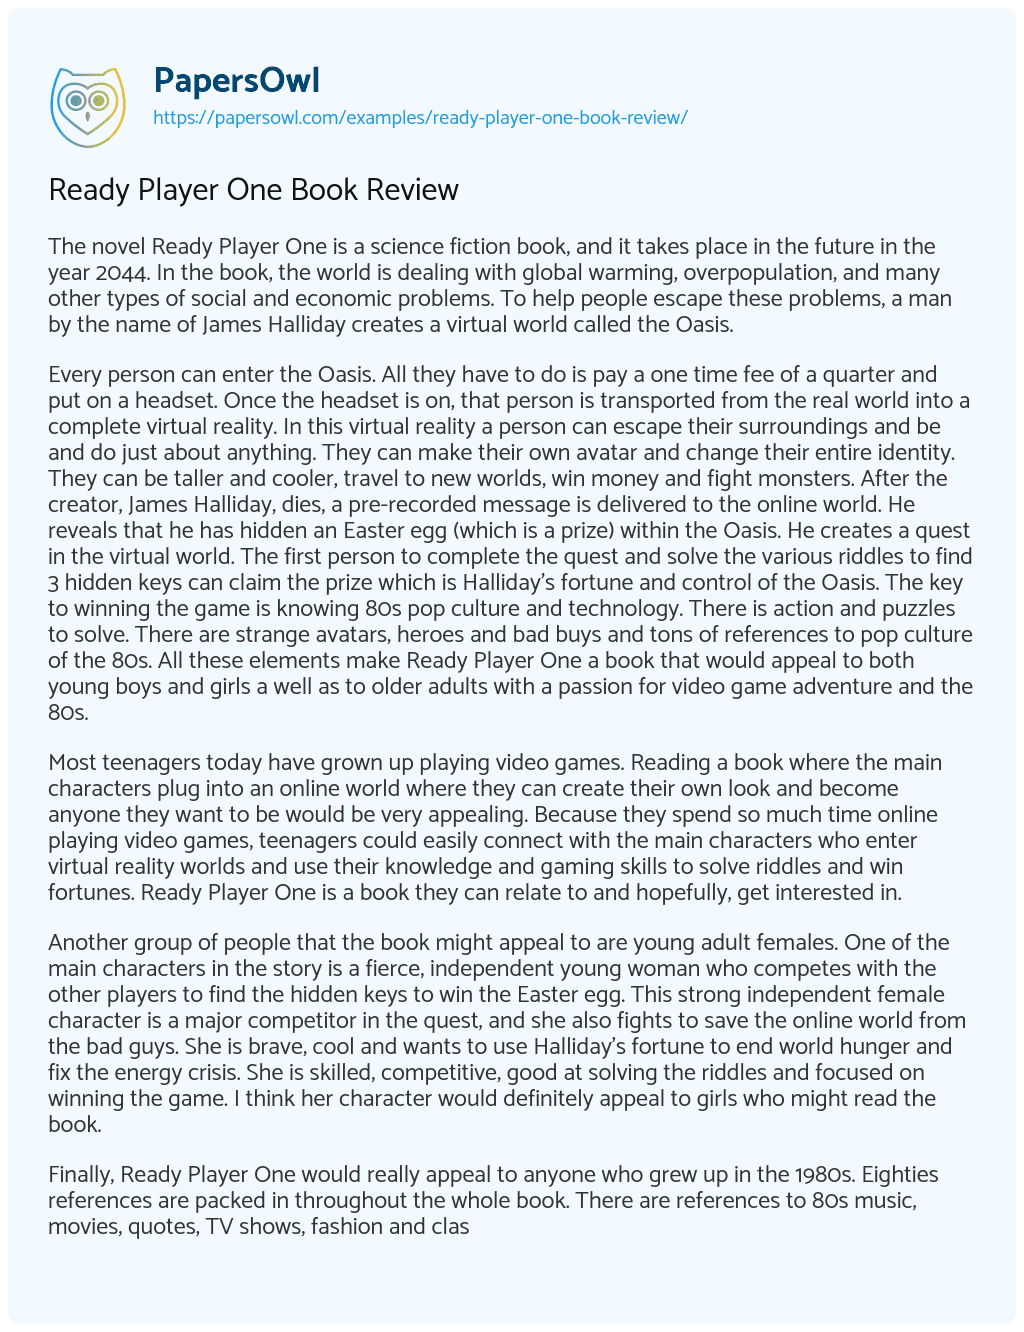 Essay on Ready Player One Book Review